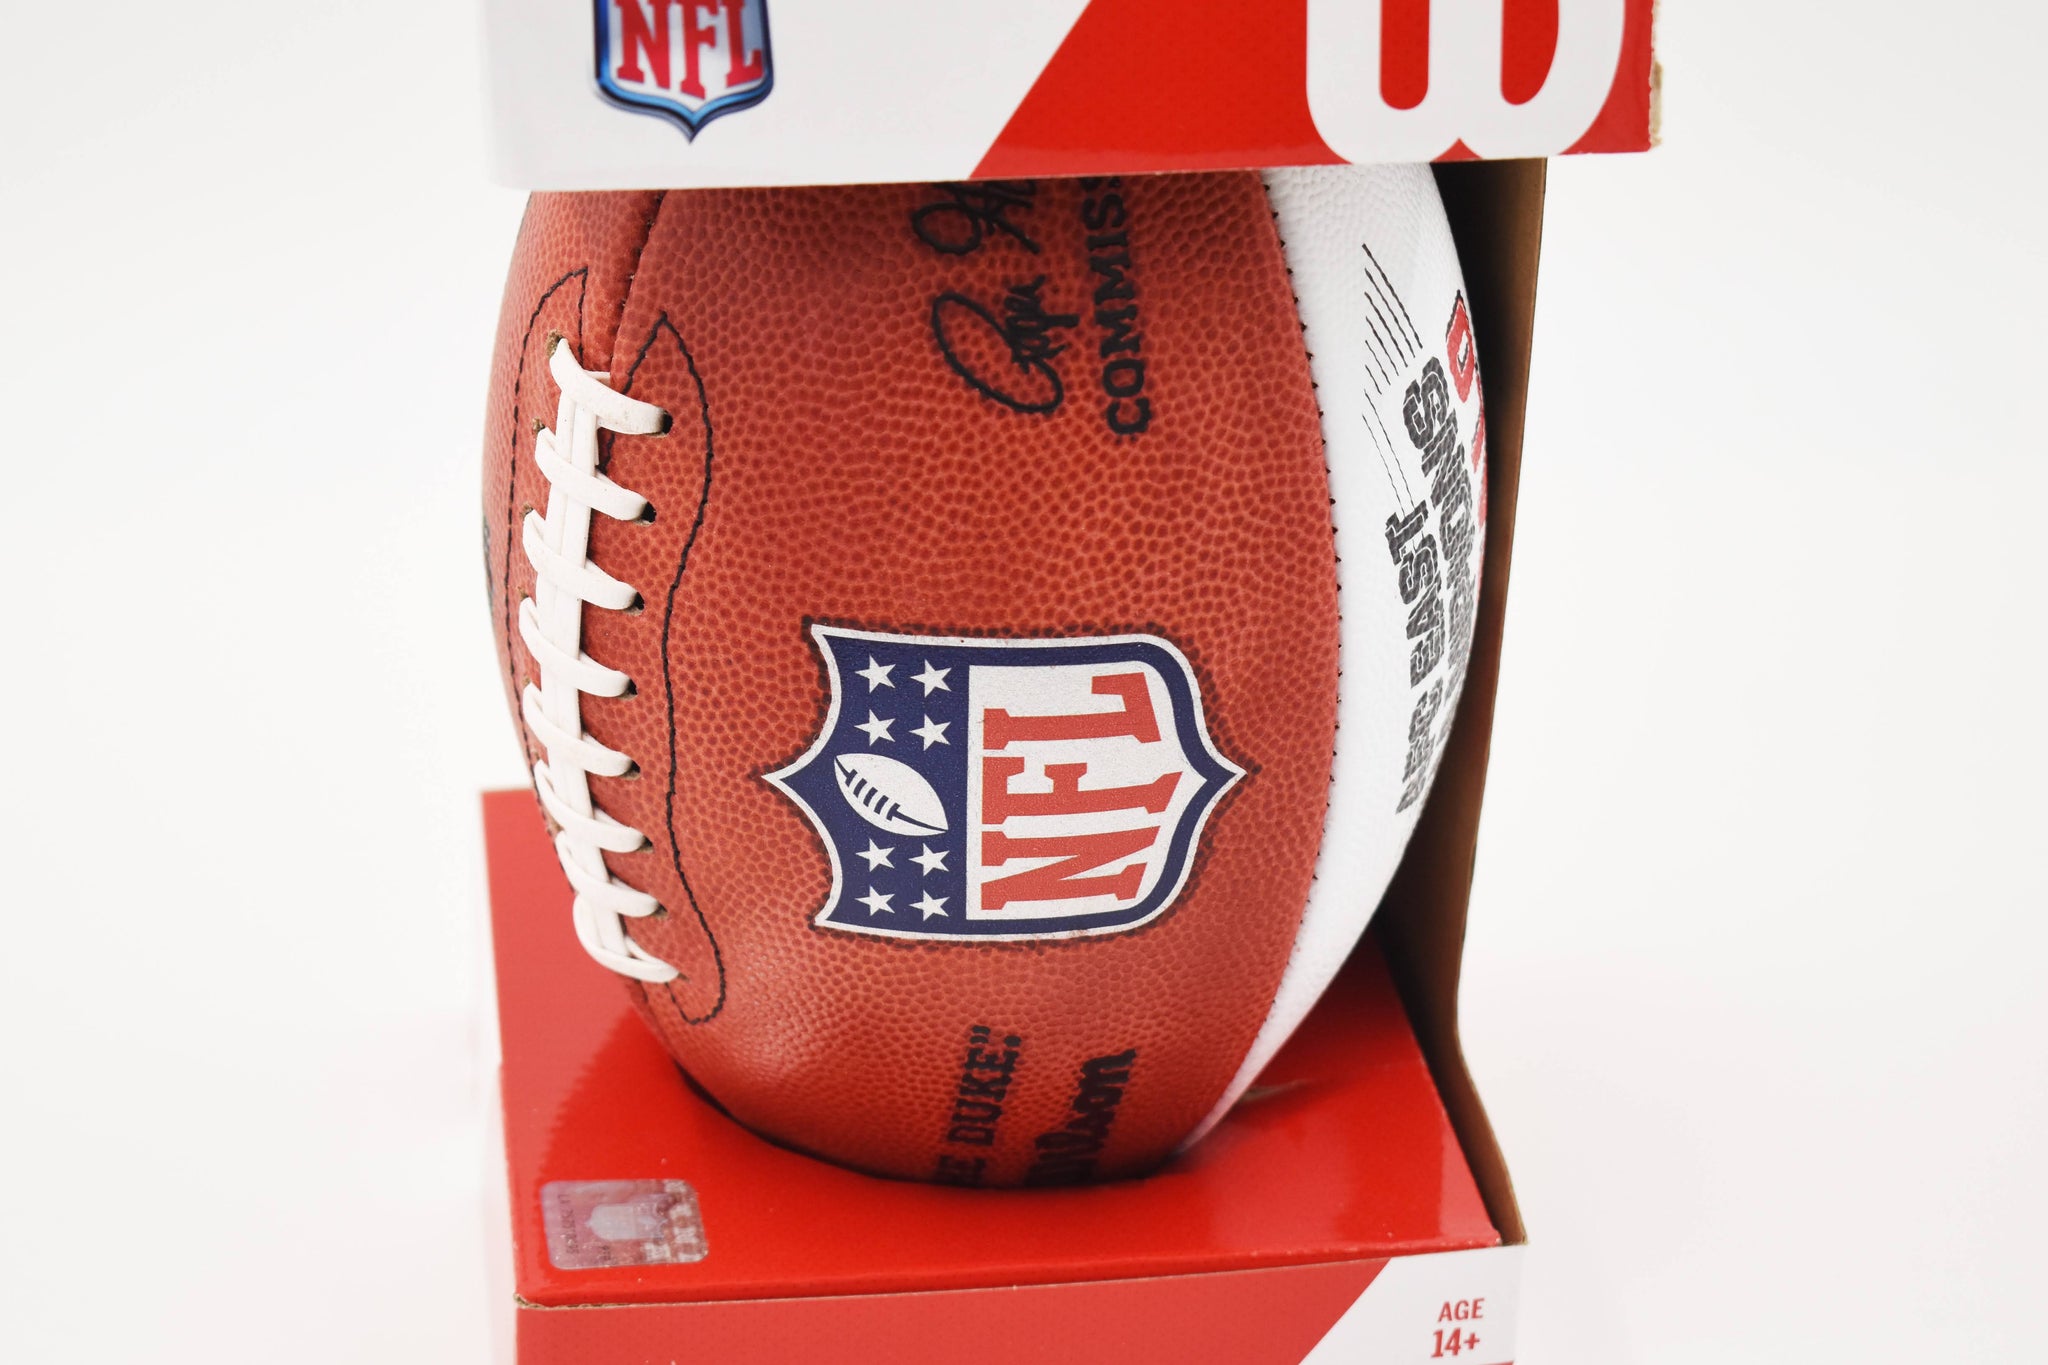 Buffalo Bills AFC East Champions Official NFL Game Ball